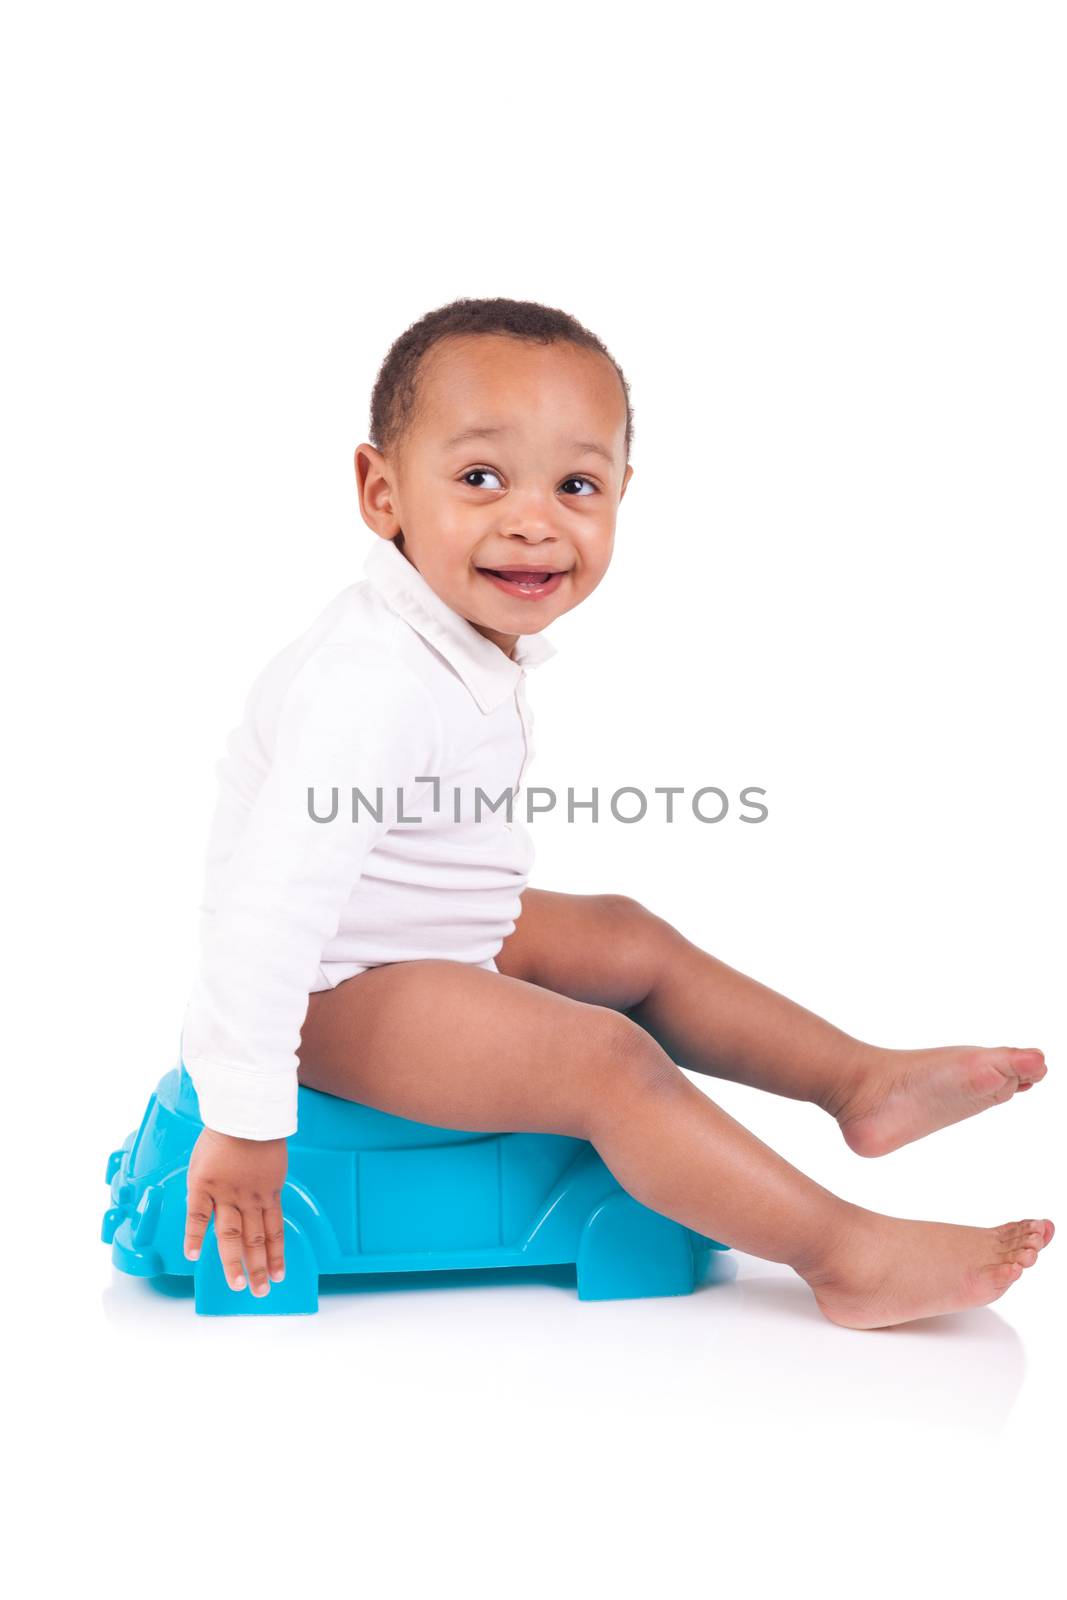 African child on potty, isolated over white by michel74100